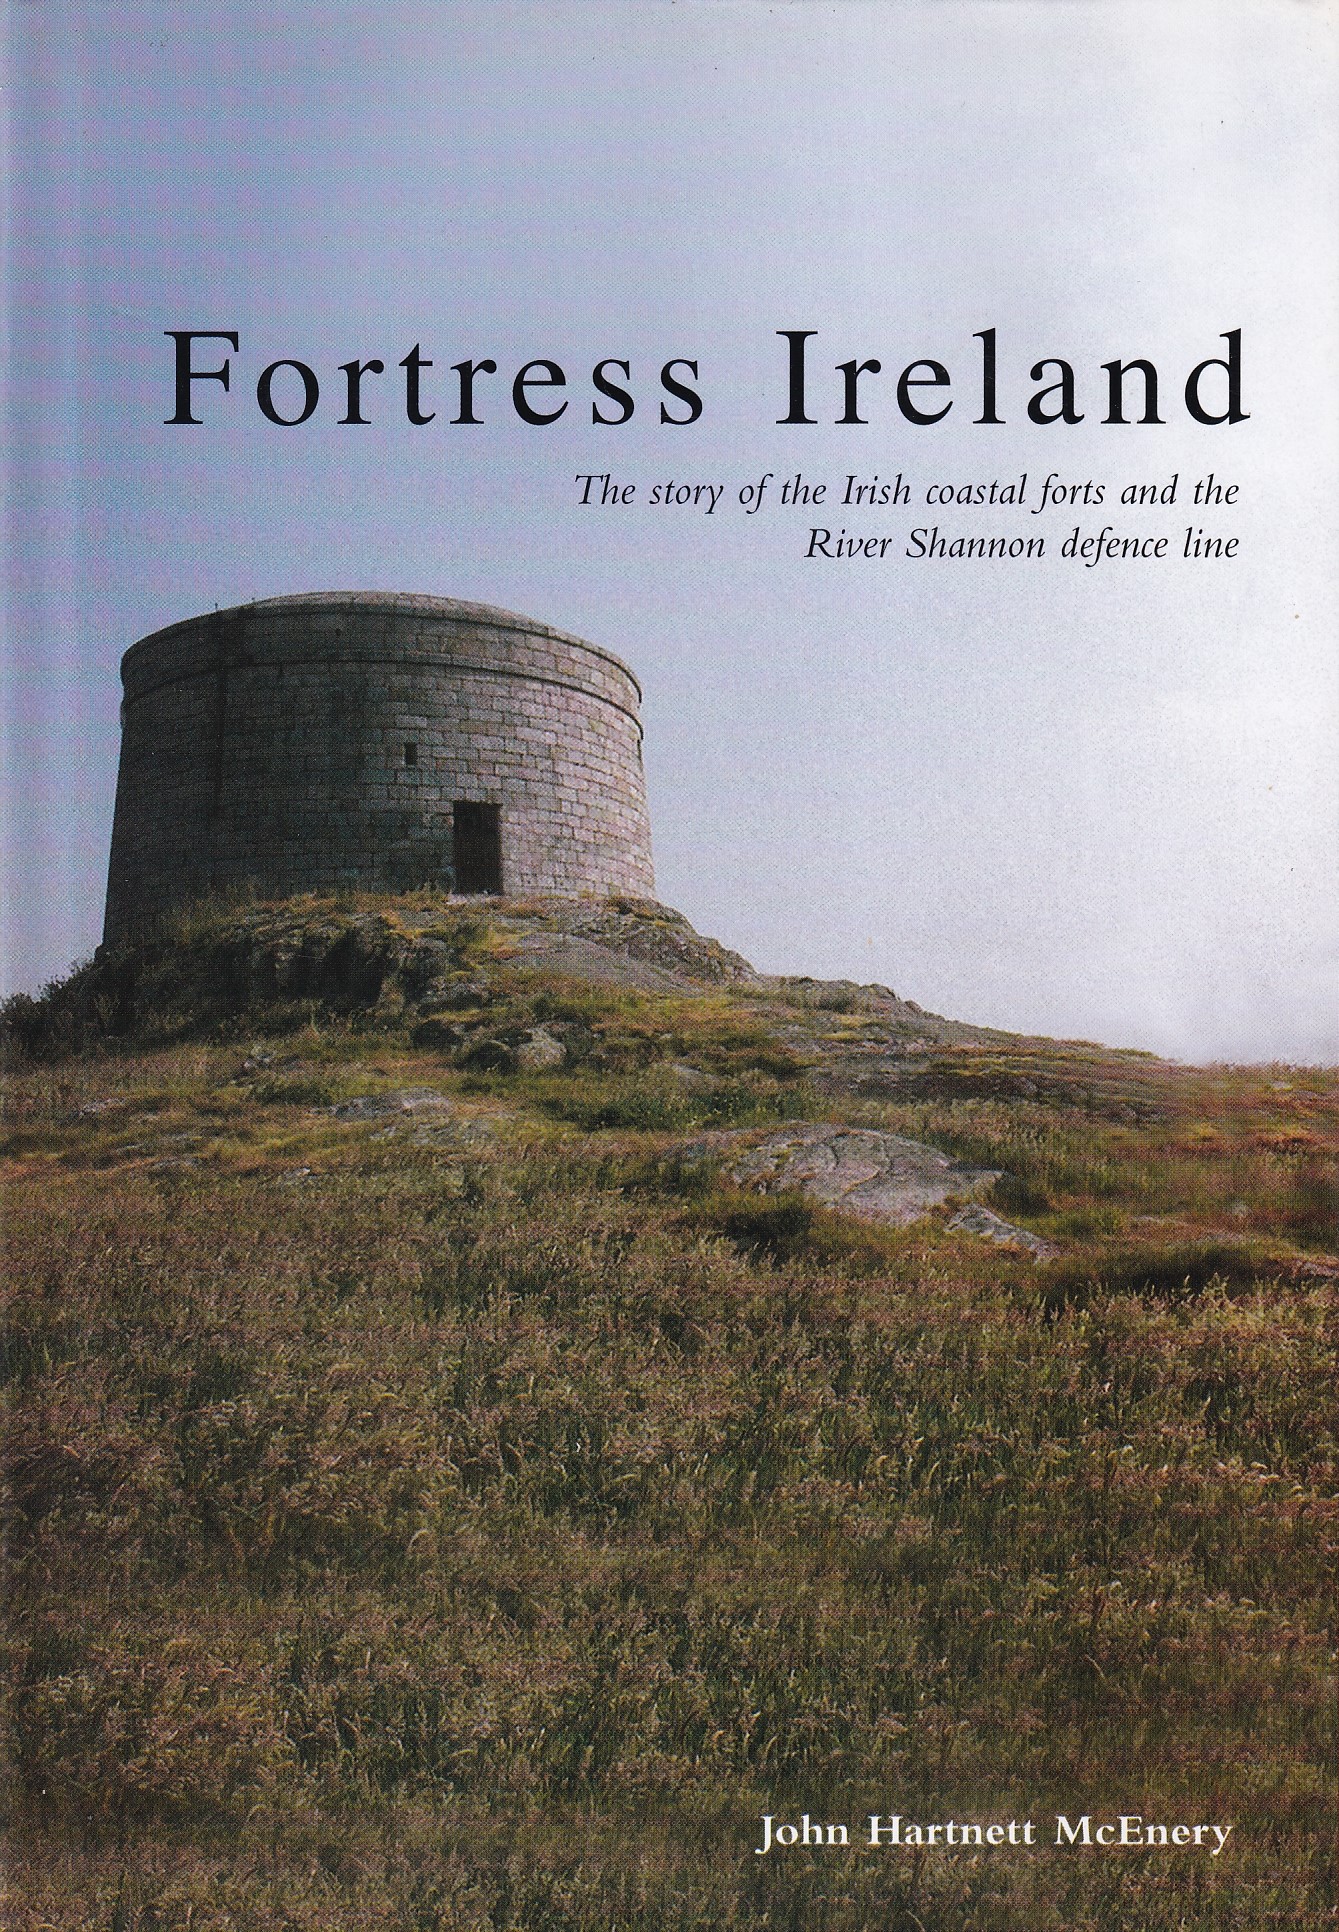 Fortress Ireland: The Story of the Irish Coastal Forts and the River Shannon Defence Line | John Hartnett McEnery | Charlie Byrne's